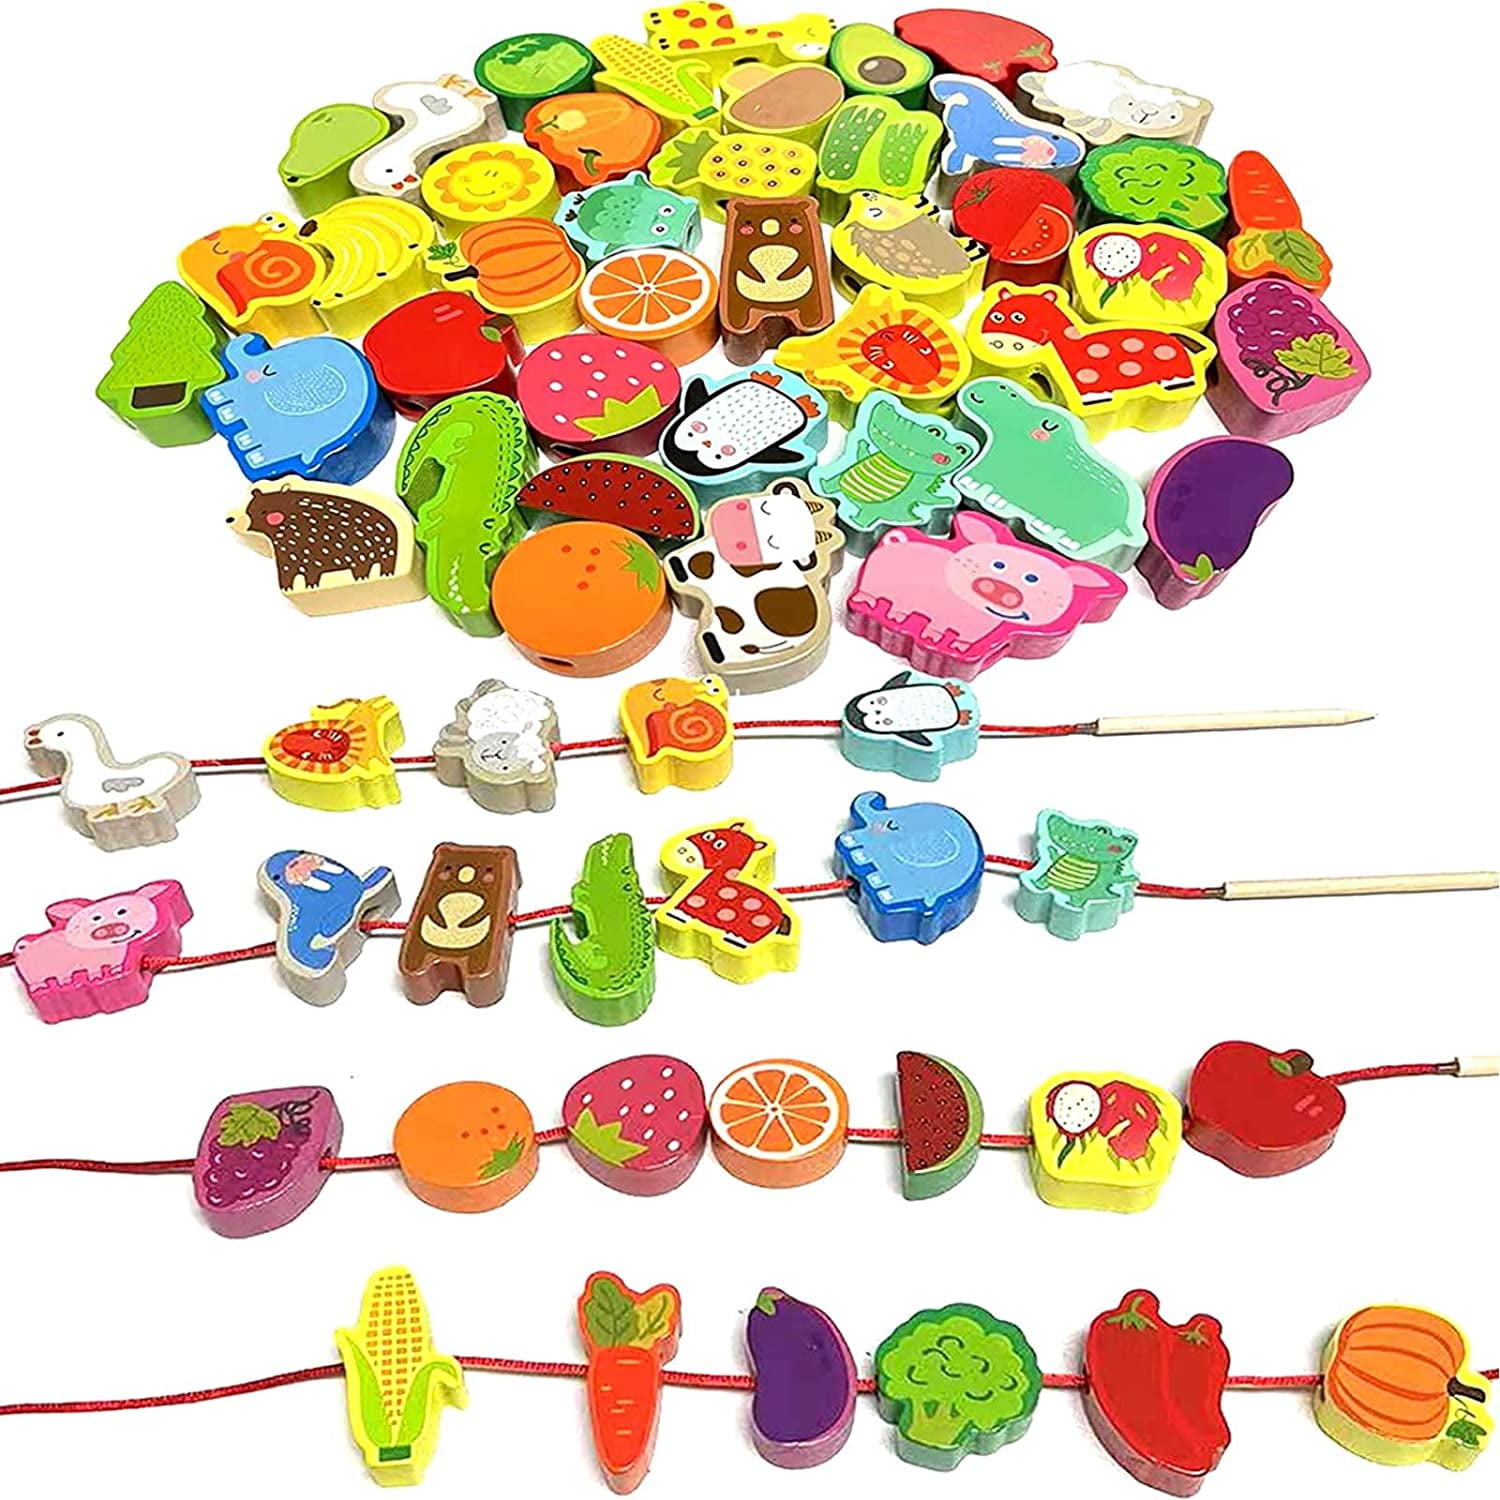 KUTOI Plastic Lacing Beads for Toddlers with Fun Shapes, Long String, and Brilliant Colors for Early Learning and Educational Fun, Montessori Toys